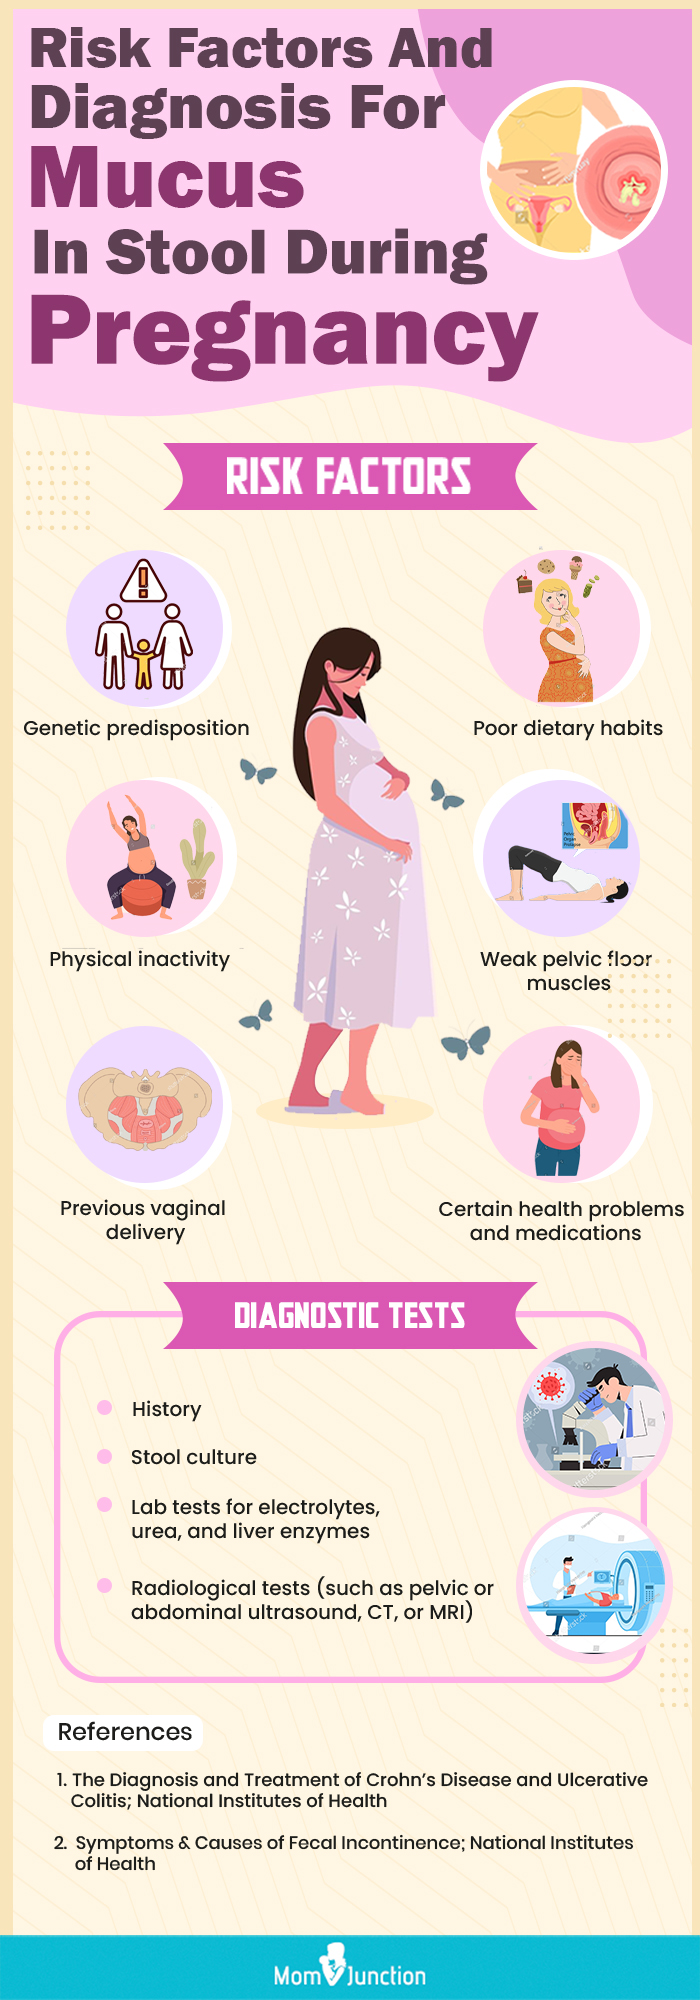 diagnosis for mucus in stool during pregnancy (infographic)